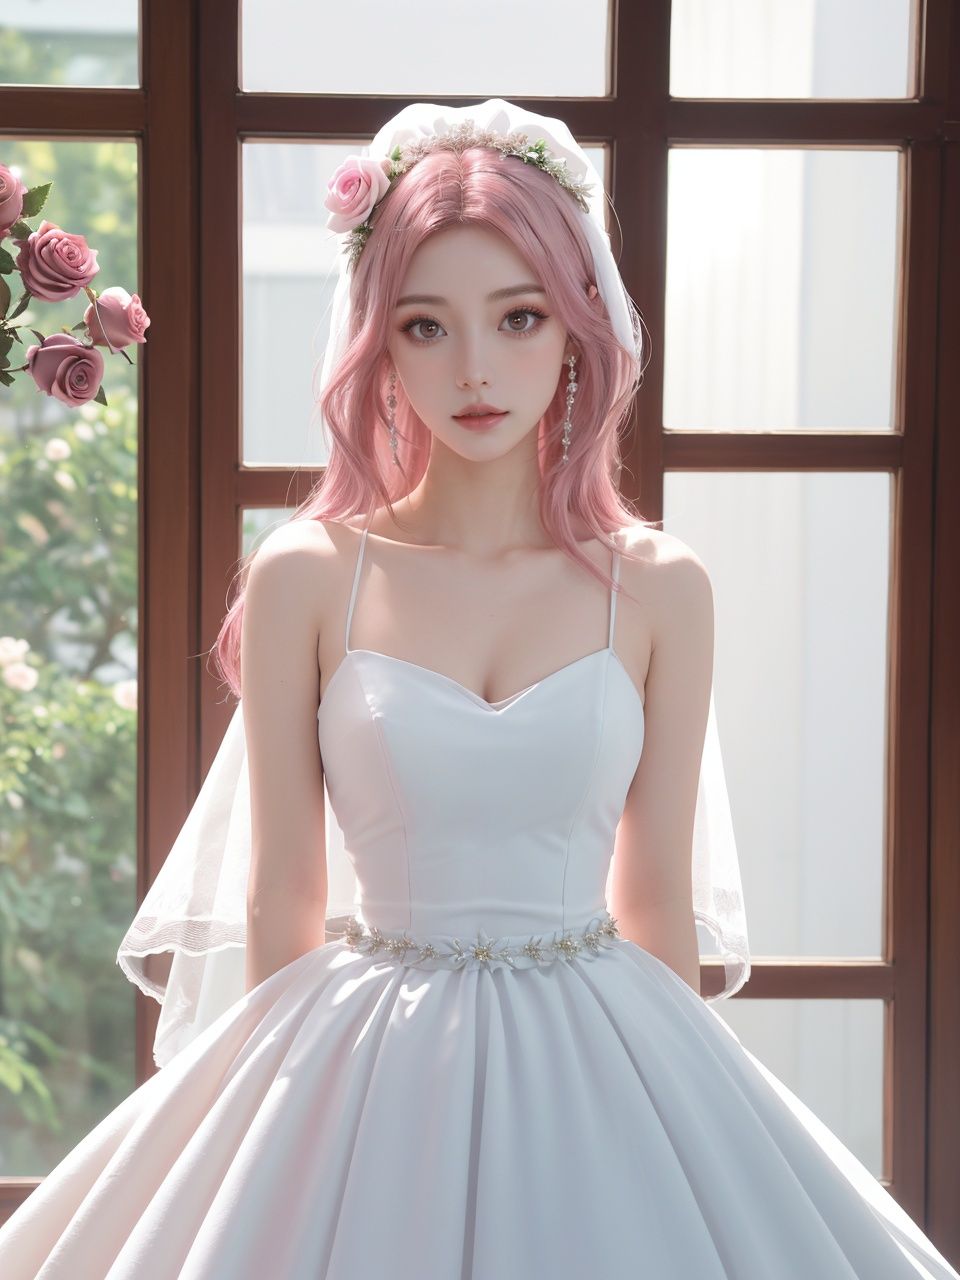 masterpiece,1 girl,22 years old,Look at me,Exquisite makeup,Pink hair.,Long hair,white wedding dress,Wipe the chest,Indoor,Exquisite decoration,Bright light,Stand,In the middle of the picture,Whole body,Plenty of roses,textured skin,super detail,best quality,Future City,FilmGirl,blue and white porcelain,